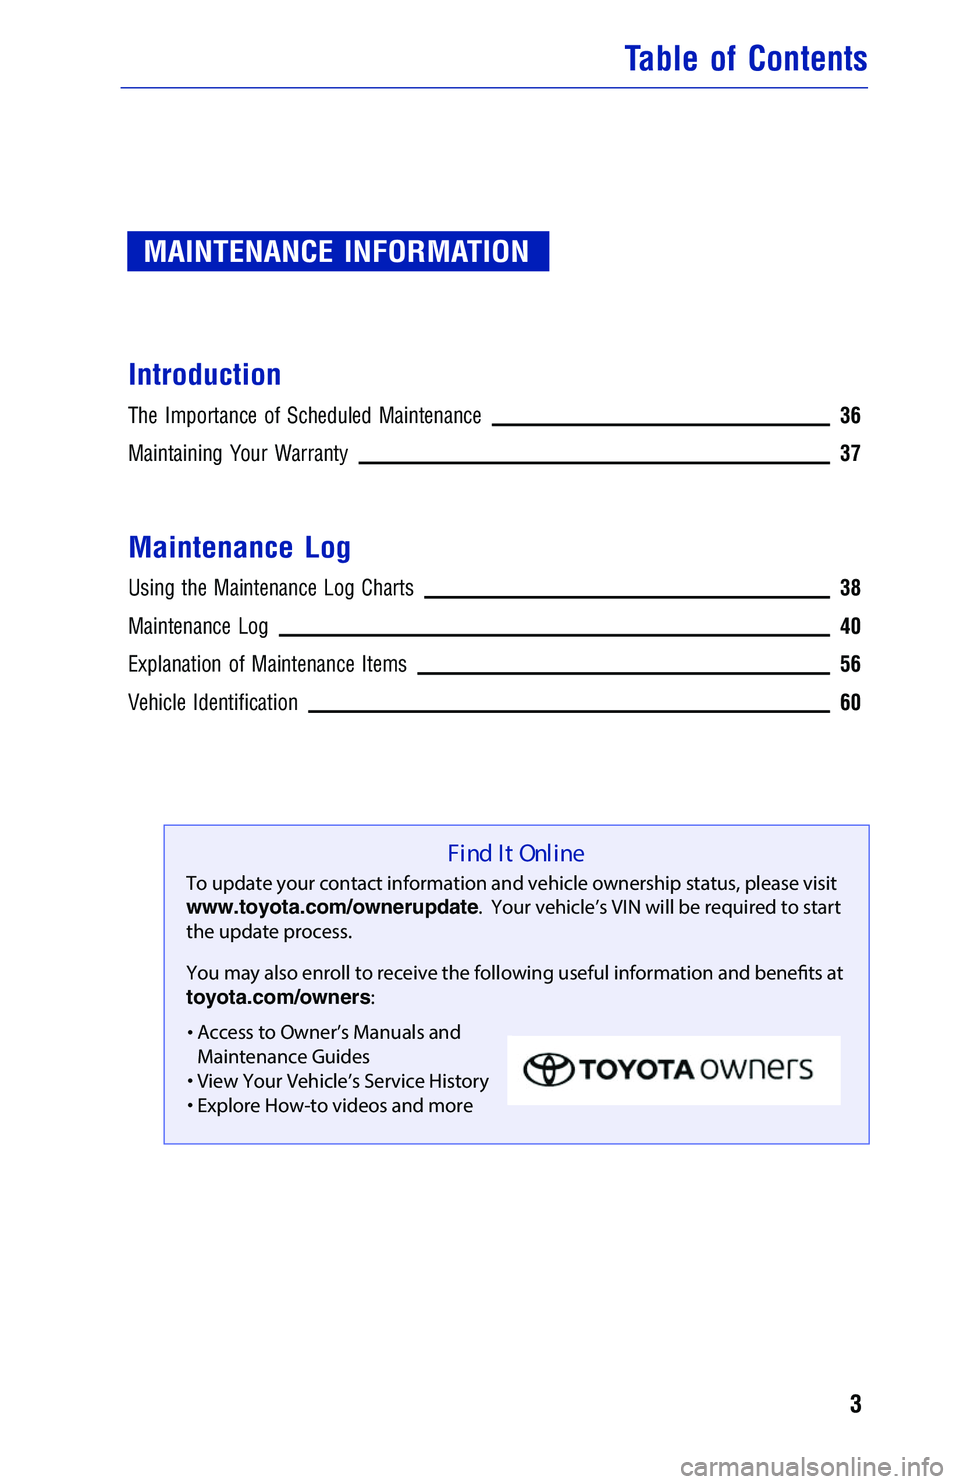 TOYOTA CAMRY HYBRID 2018  Warranties & Maintenance Guides (in English) MAINTENANCE INFORMATION
Introduction
The Importance of Scheduled Maintenance 36
Maintaining Your Warranty37
Maintenance Log
Using the Maintenance Log Charts38
Maintenance Log40
Explanation of Maintena